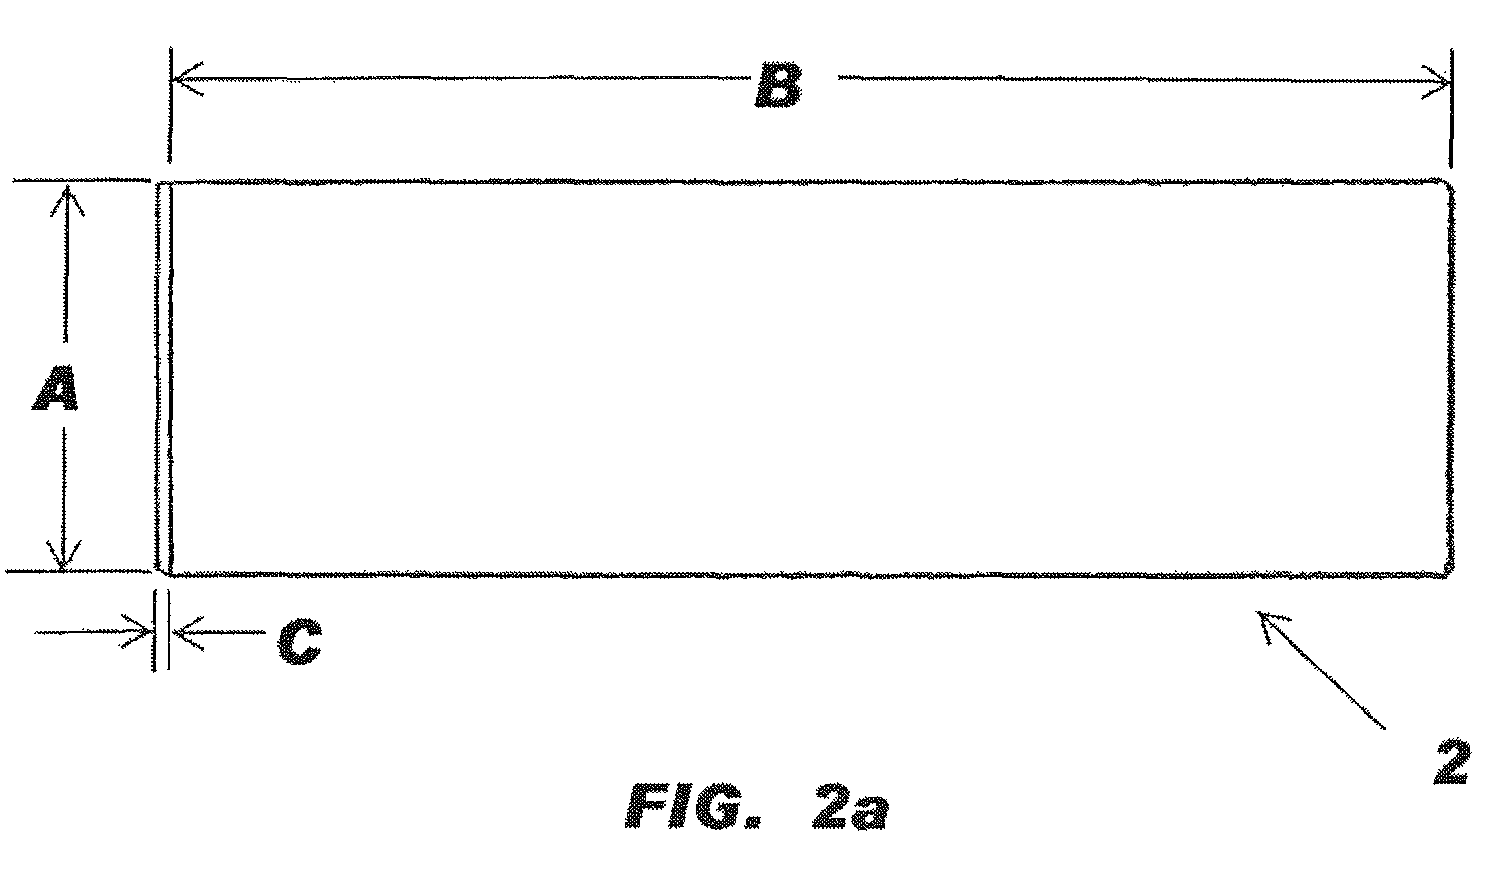 Apparatus for a wind resistant and post load re-tensioning system utilizing a composite fabric and attachment apparatus